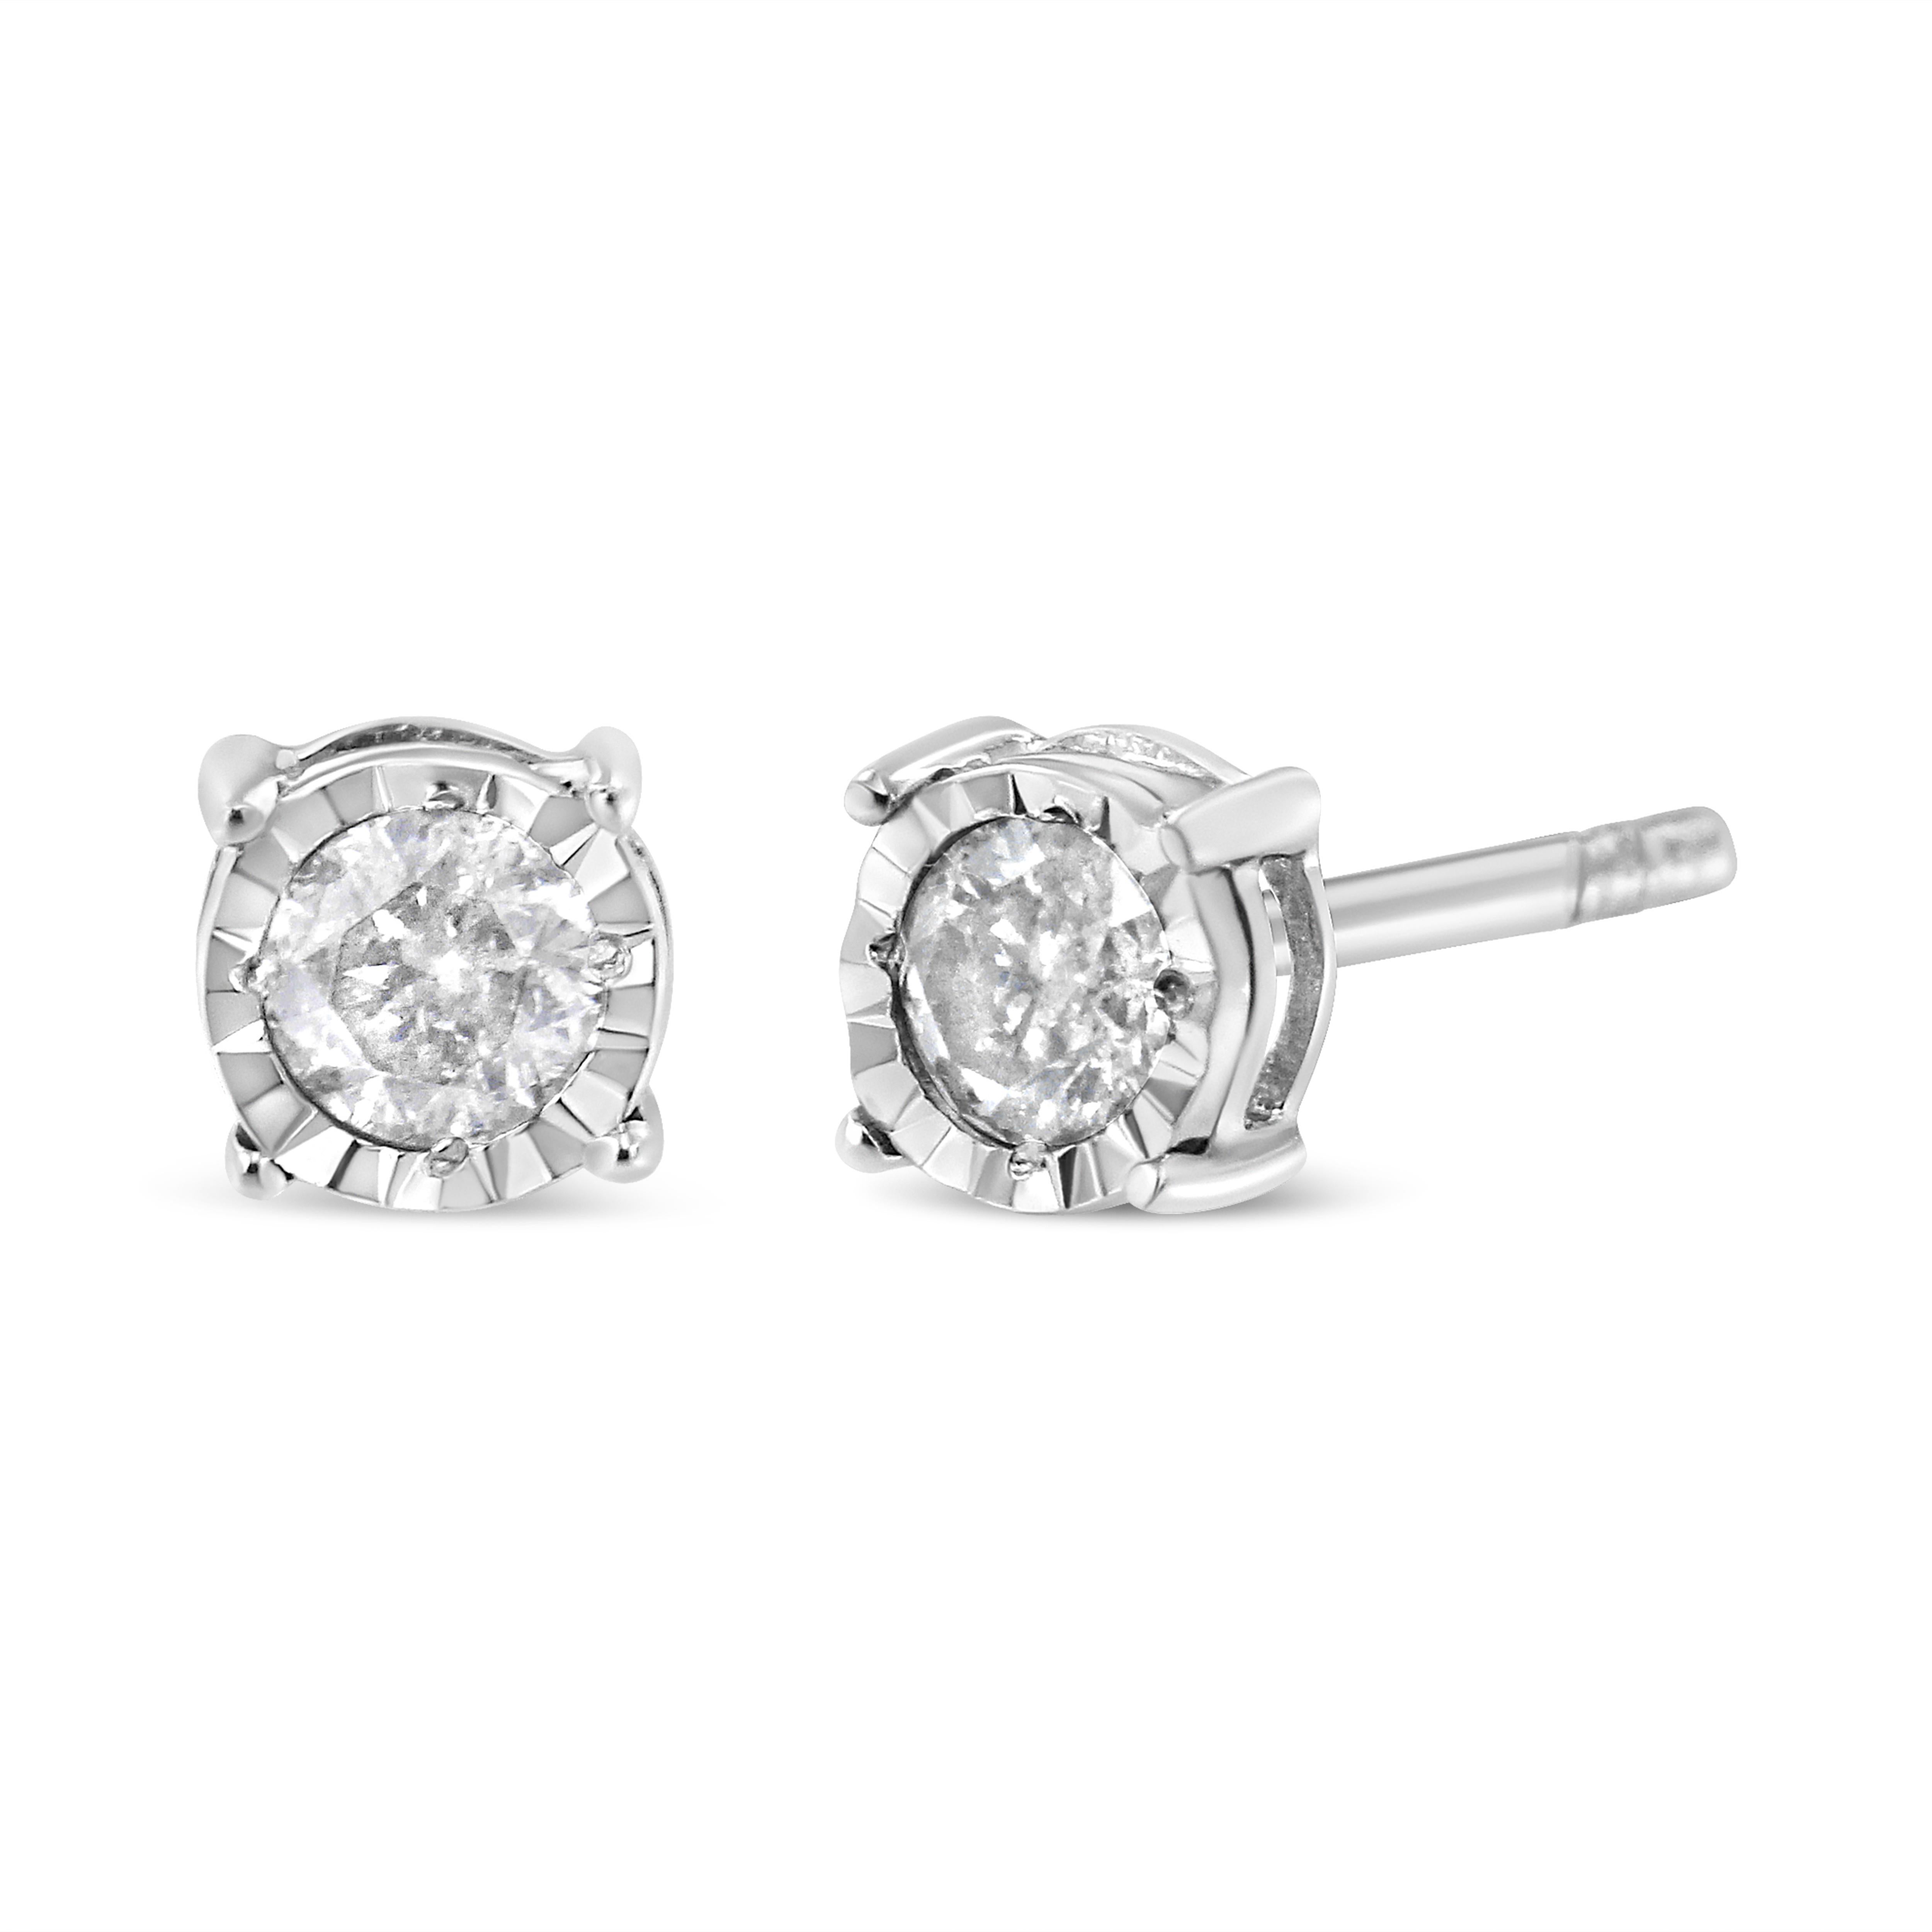 This modern pair of diamond studs features sparkling, natural diamonds in a miracle setting. The sleek design is crafted in a cool sterling silver making them the perfect choice to add a touch of color to everyday wear. Miracle-plate settings with